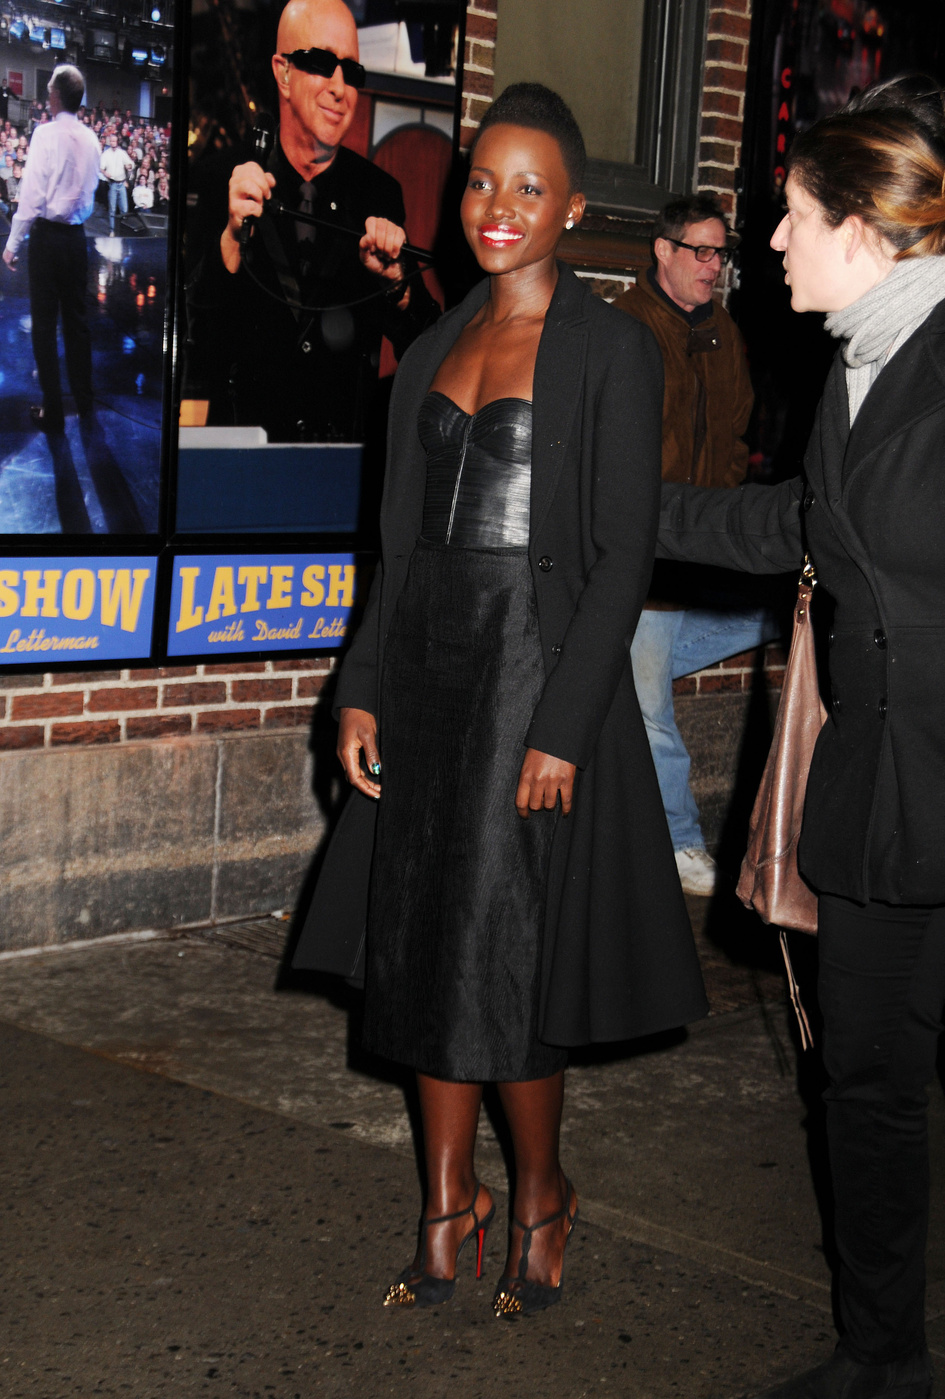 Lupita NYong'o attends the Late Show With David Lettermen at the Ed Sullivan Theatre in New York City